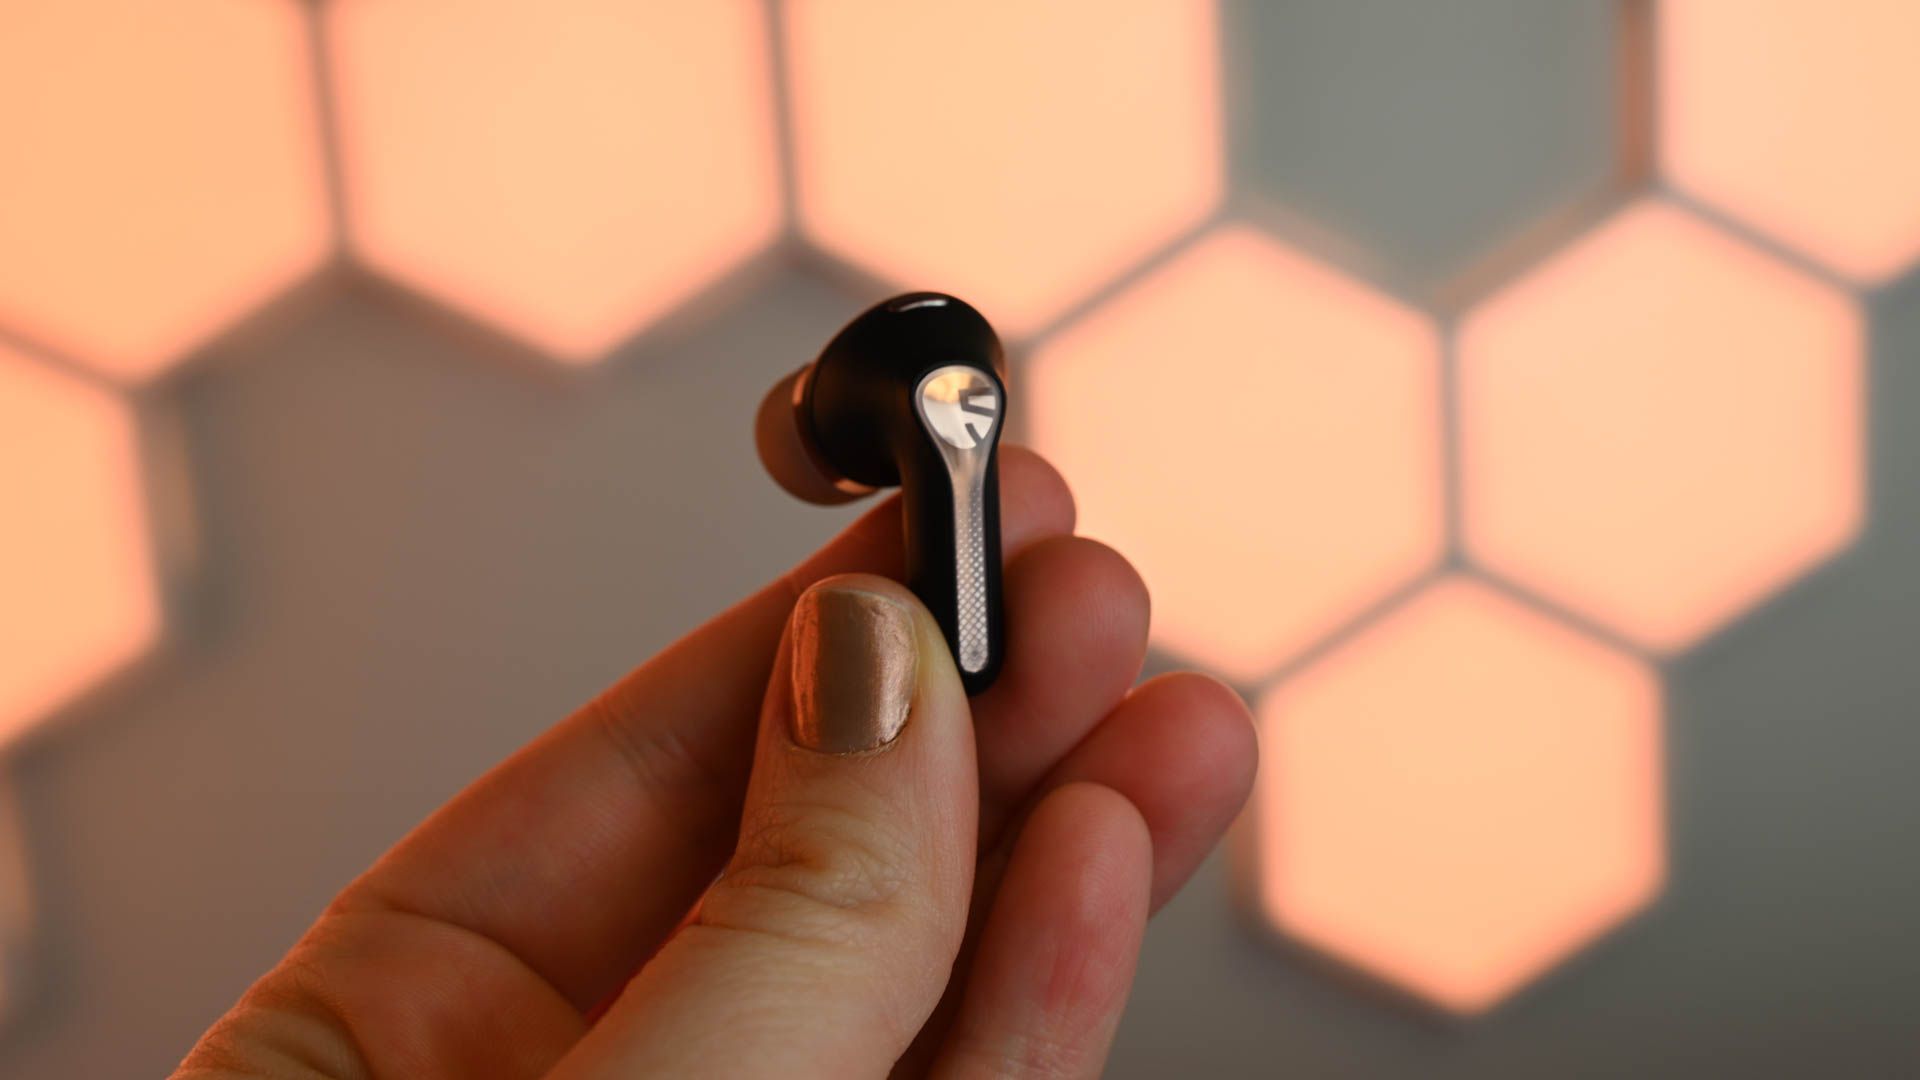 SoundPeats Capsule3 Pro Hybrid ANC Earbuds Review (Hardware) - Official  GBAtemp Review